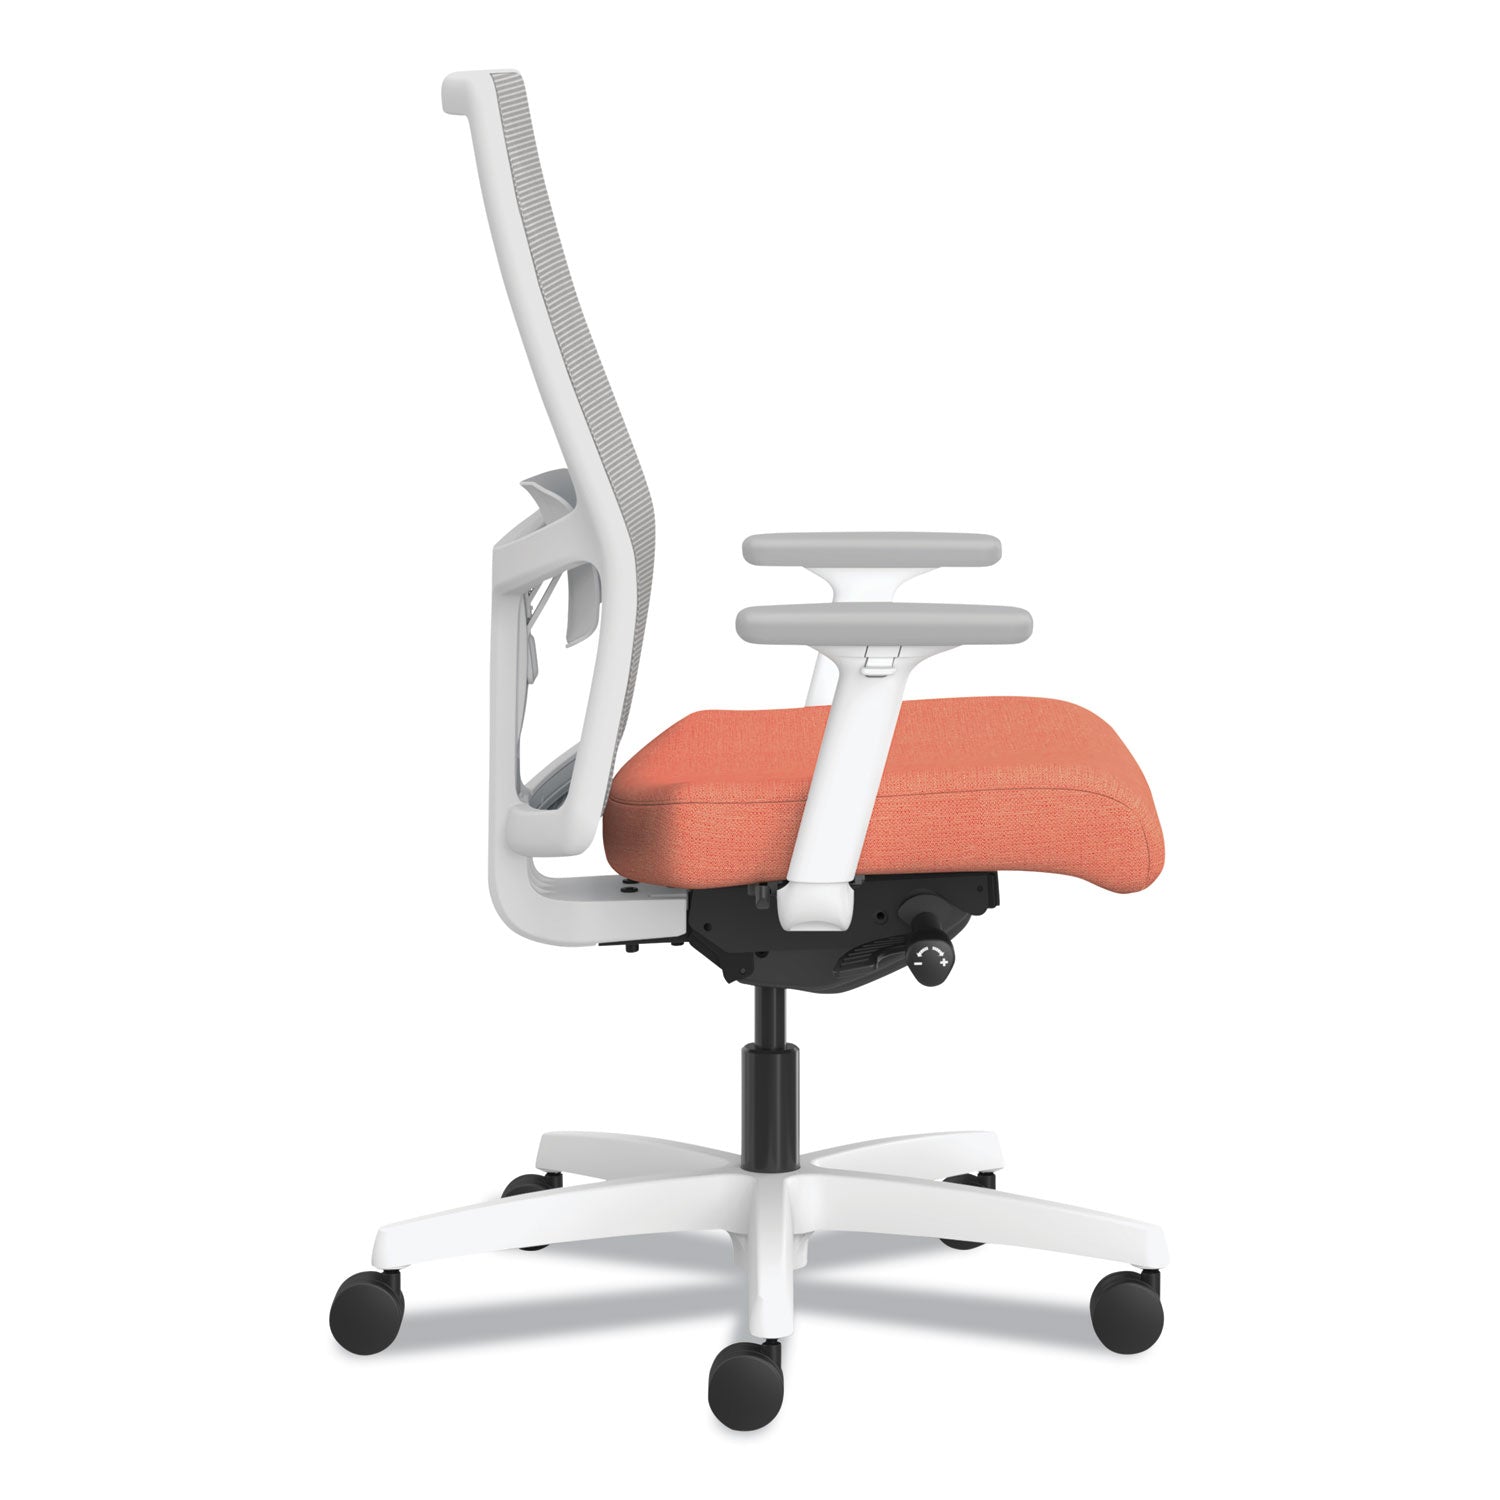 ignition-20-4-way-stretch-mid-back-mesh-task-chairwhite-lumbar-support-passion-fruit-fog-whiteships-in-7-10-business-days_honi2mm2afh02wx - 3